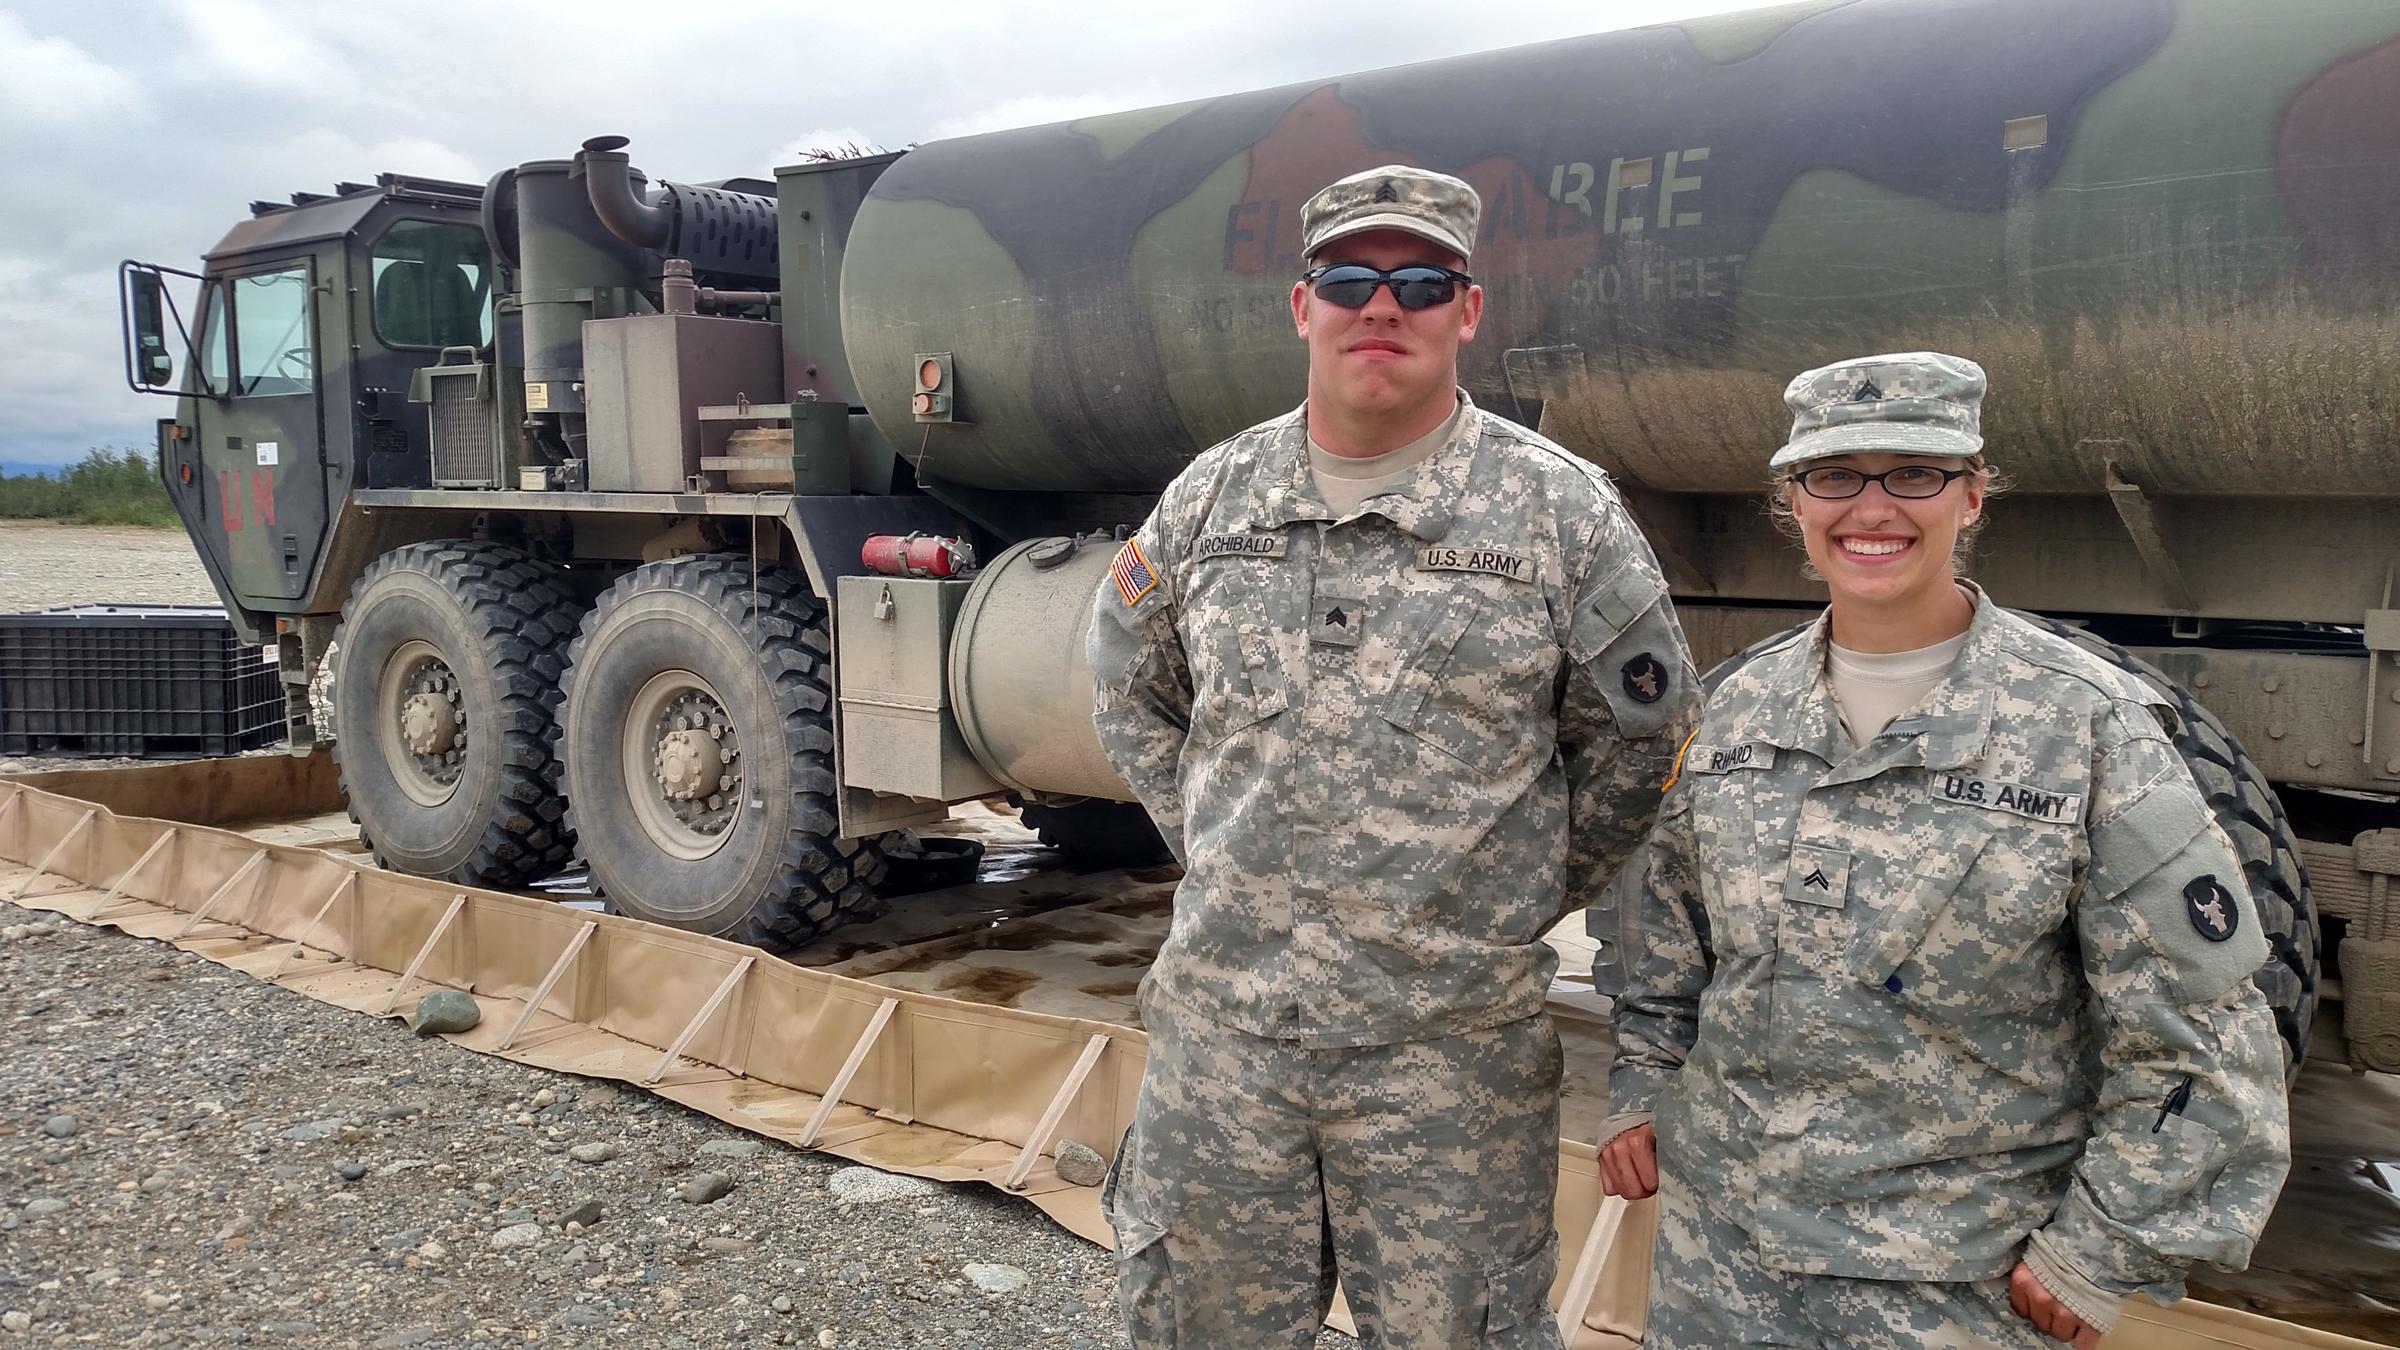 Iowa Guard Cpl. Lacey Richards, right, and Sgt. Tyler Archibald at a fueling point on a training range near Fort Greely. (Photo by Tim Ellis, KUAC - Fairbanks)